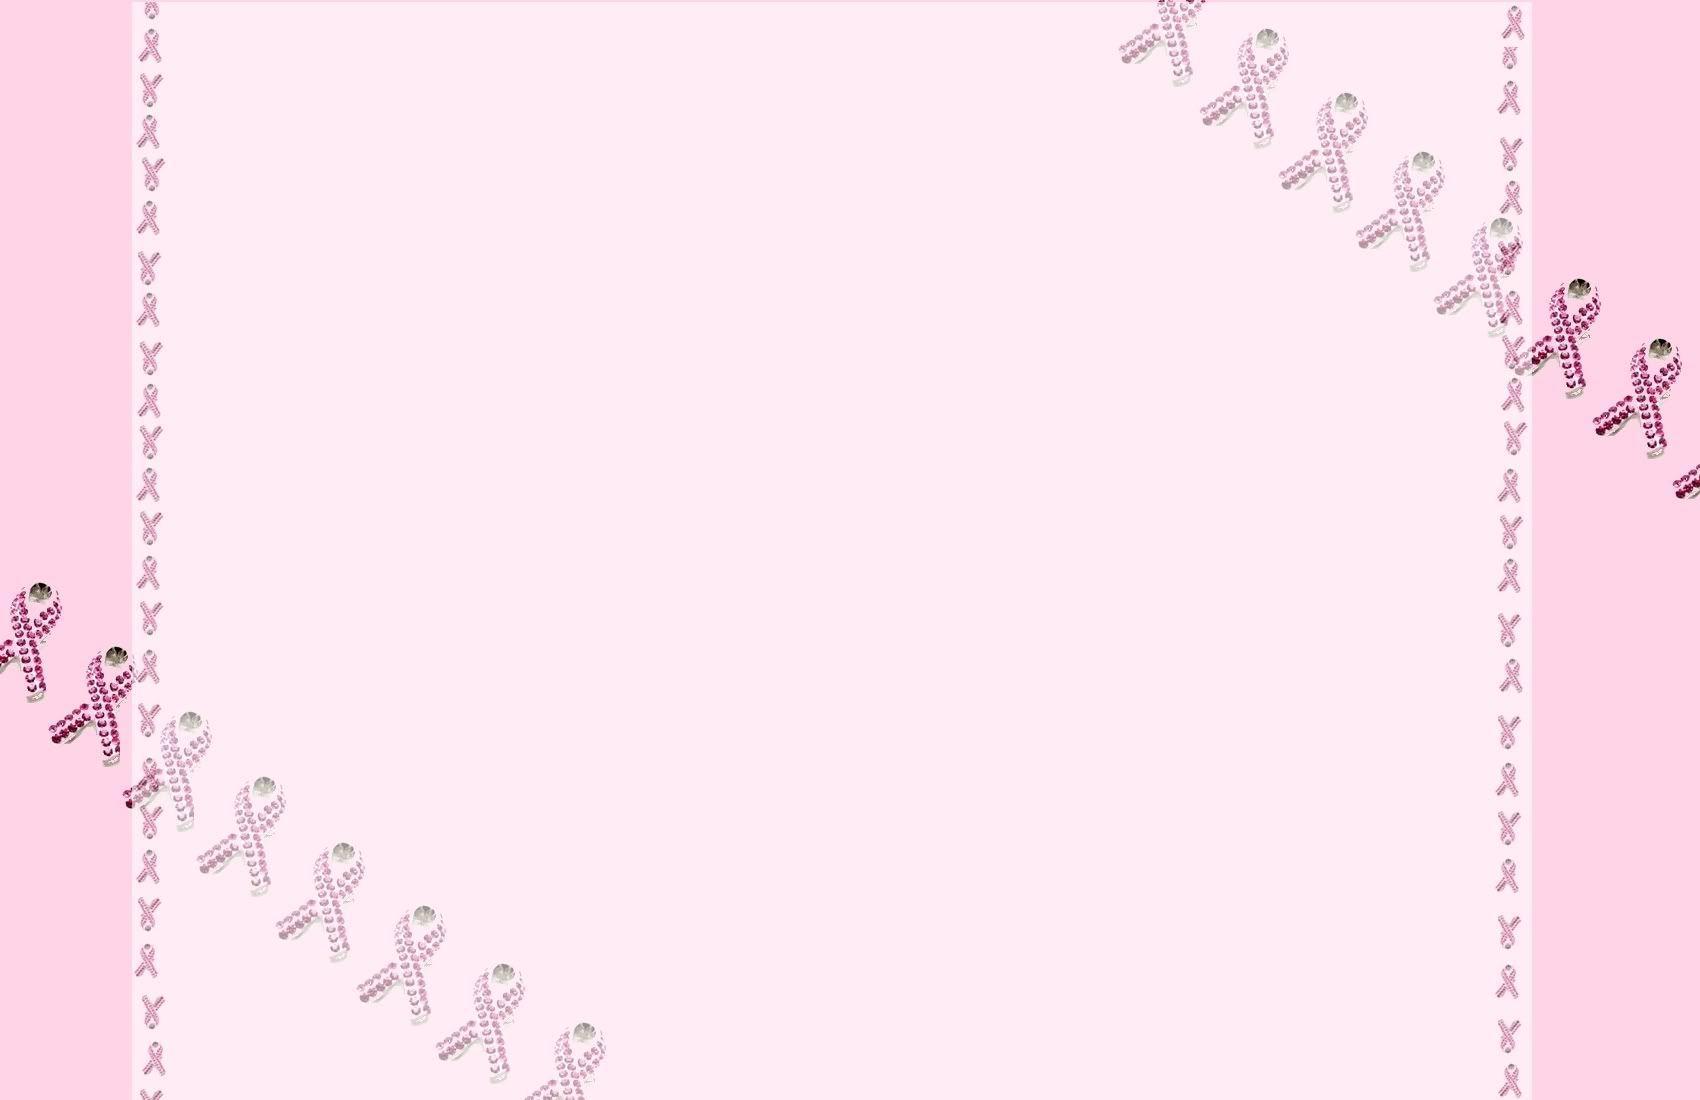 Breast Cancer Awareness Background